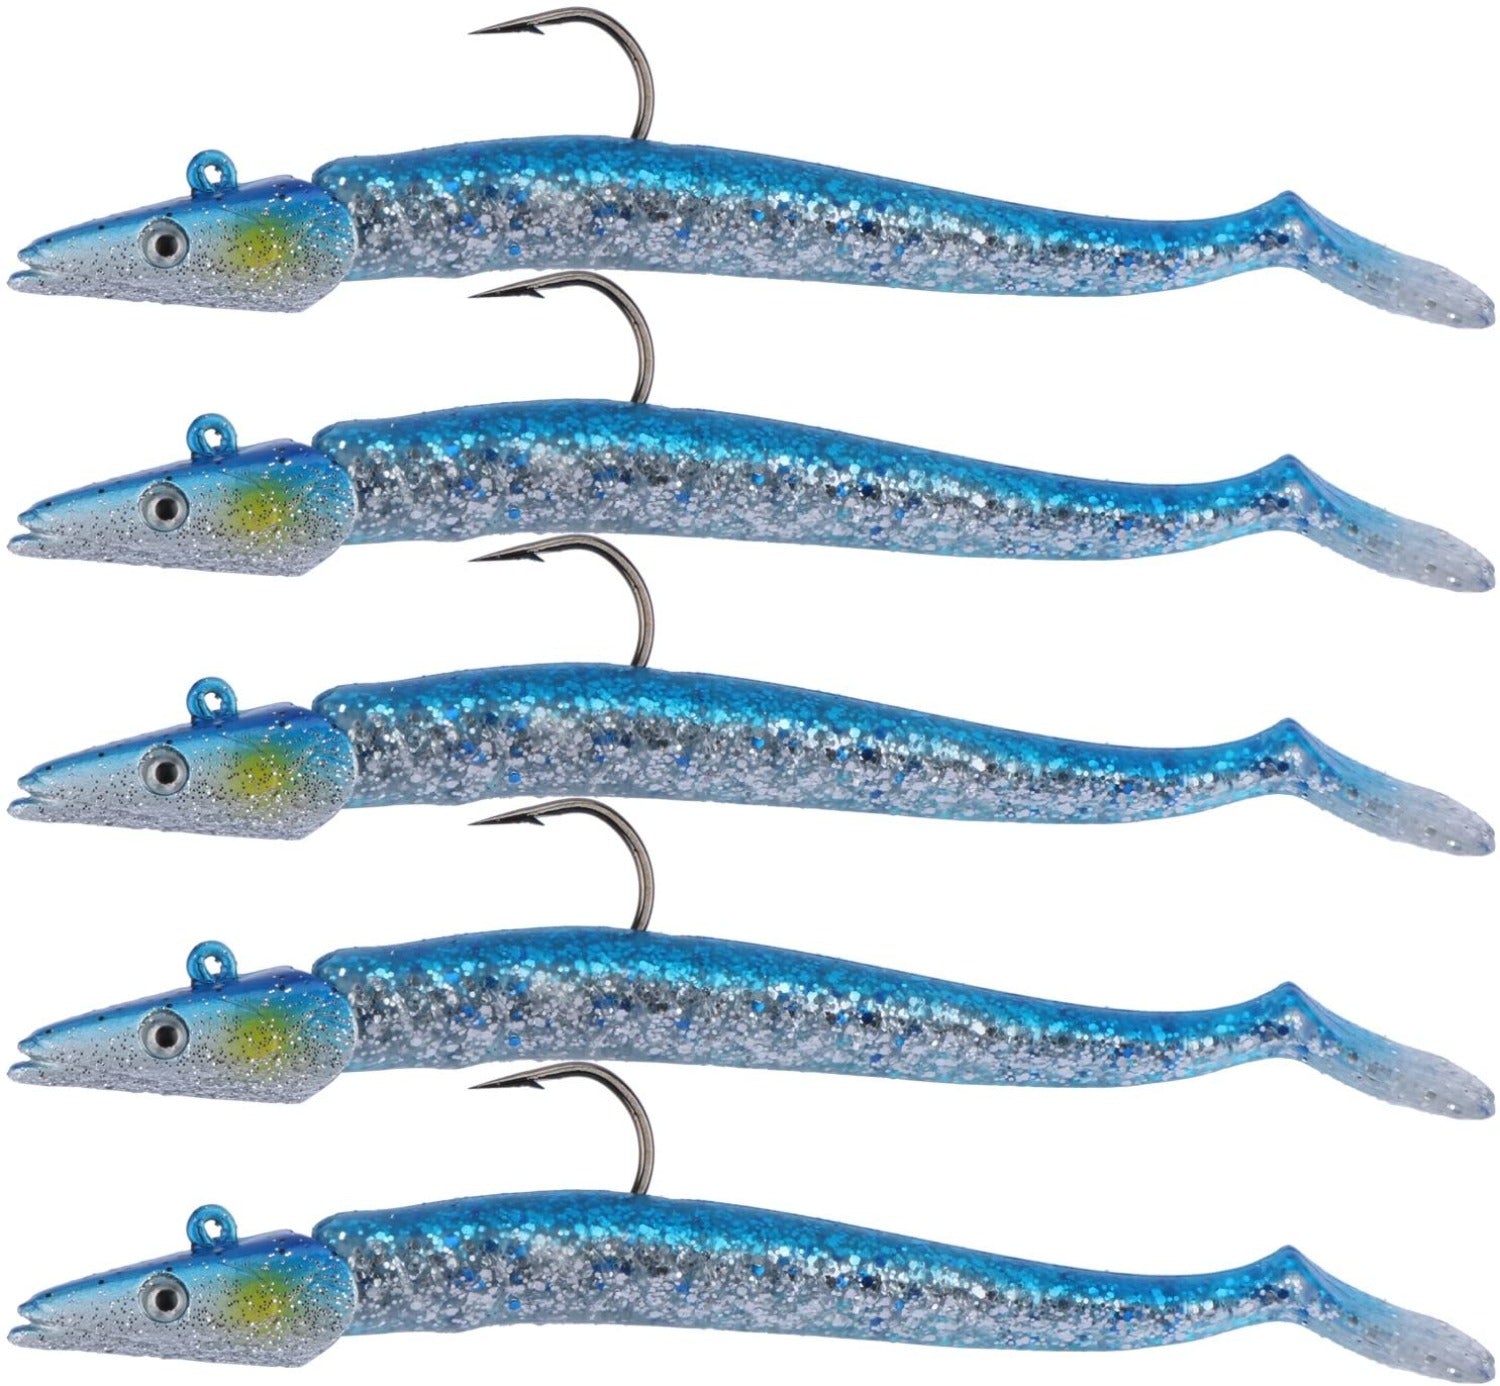  Goture Soft Fishing Lures Jig Heads, Saltwater